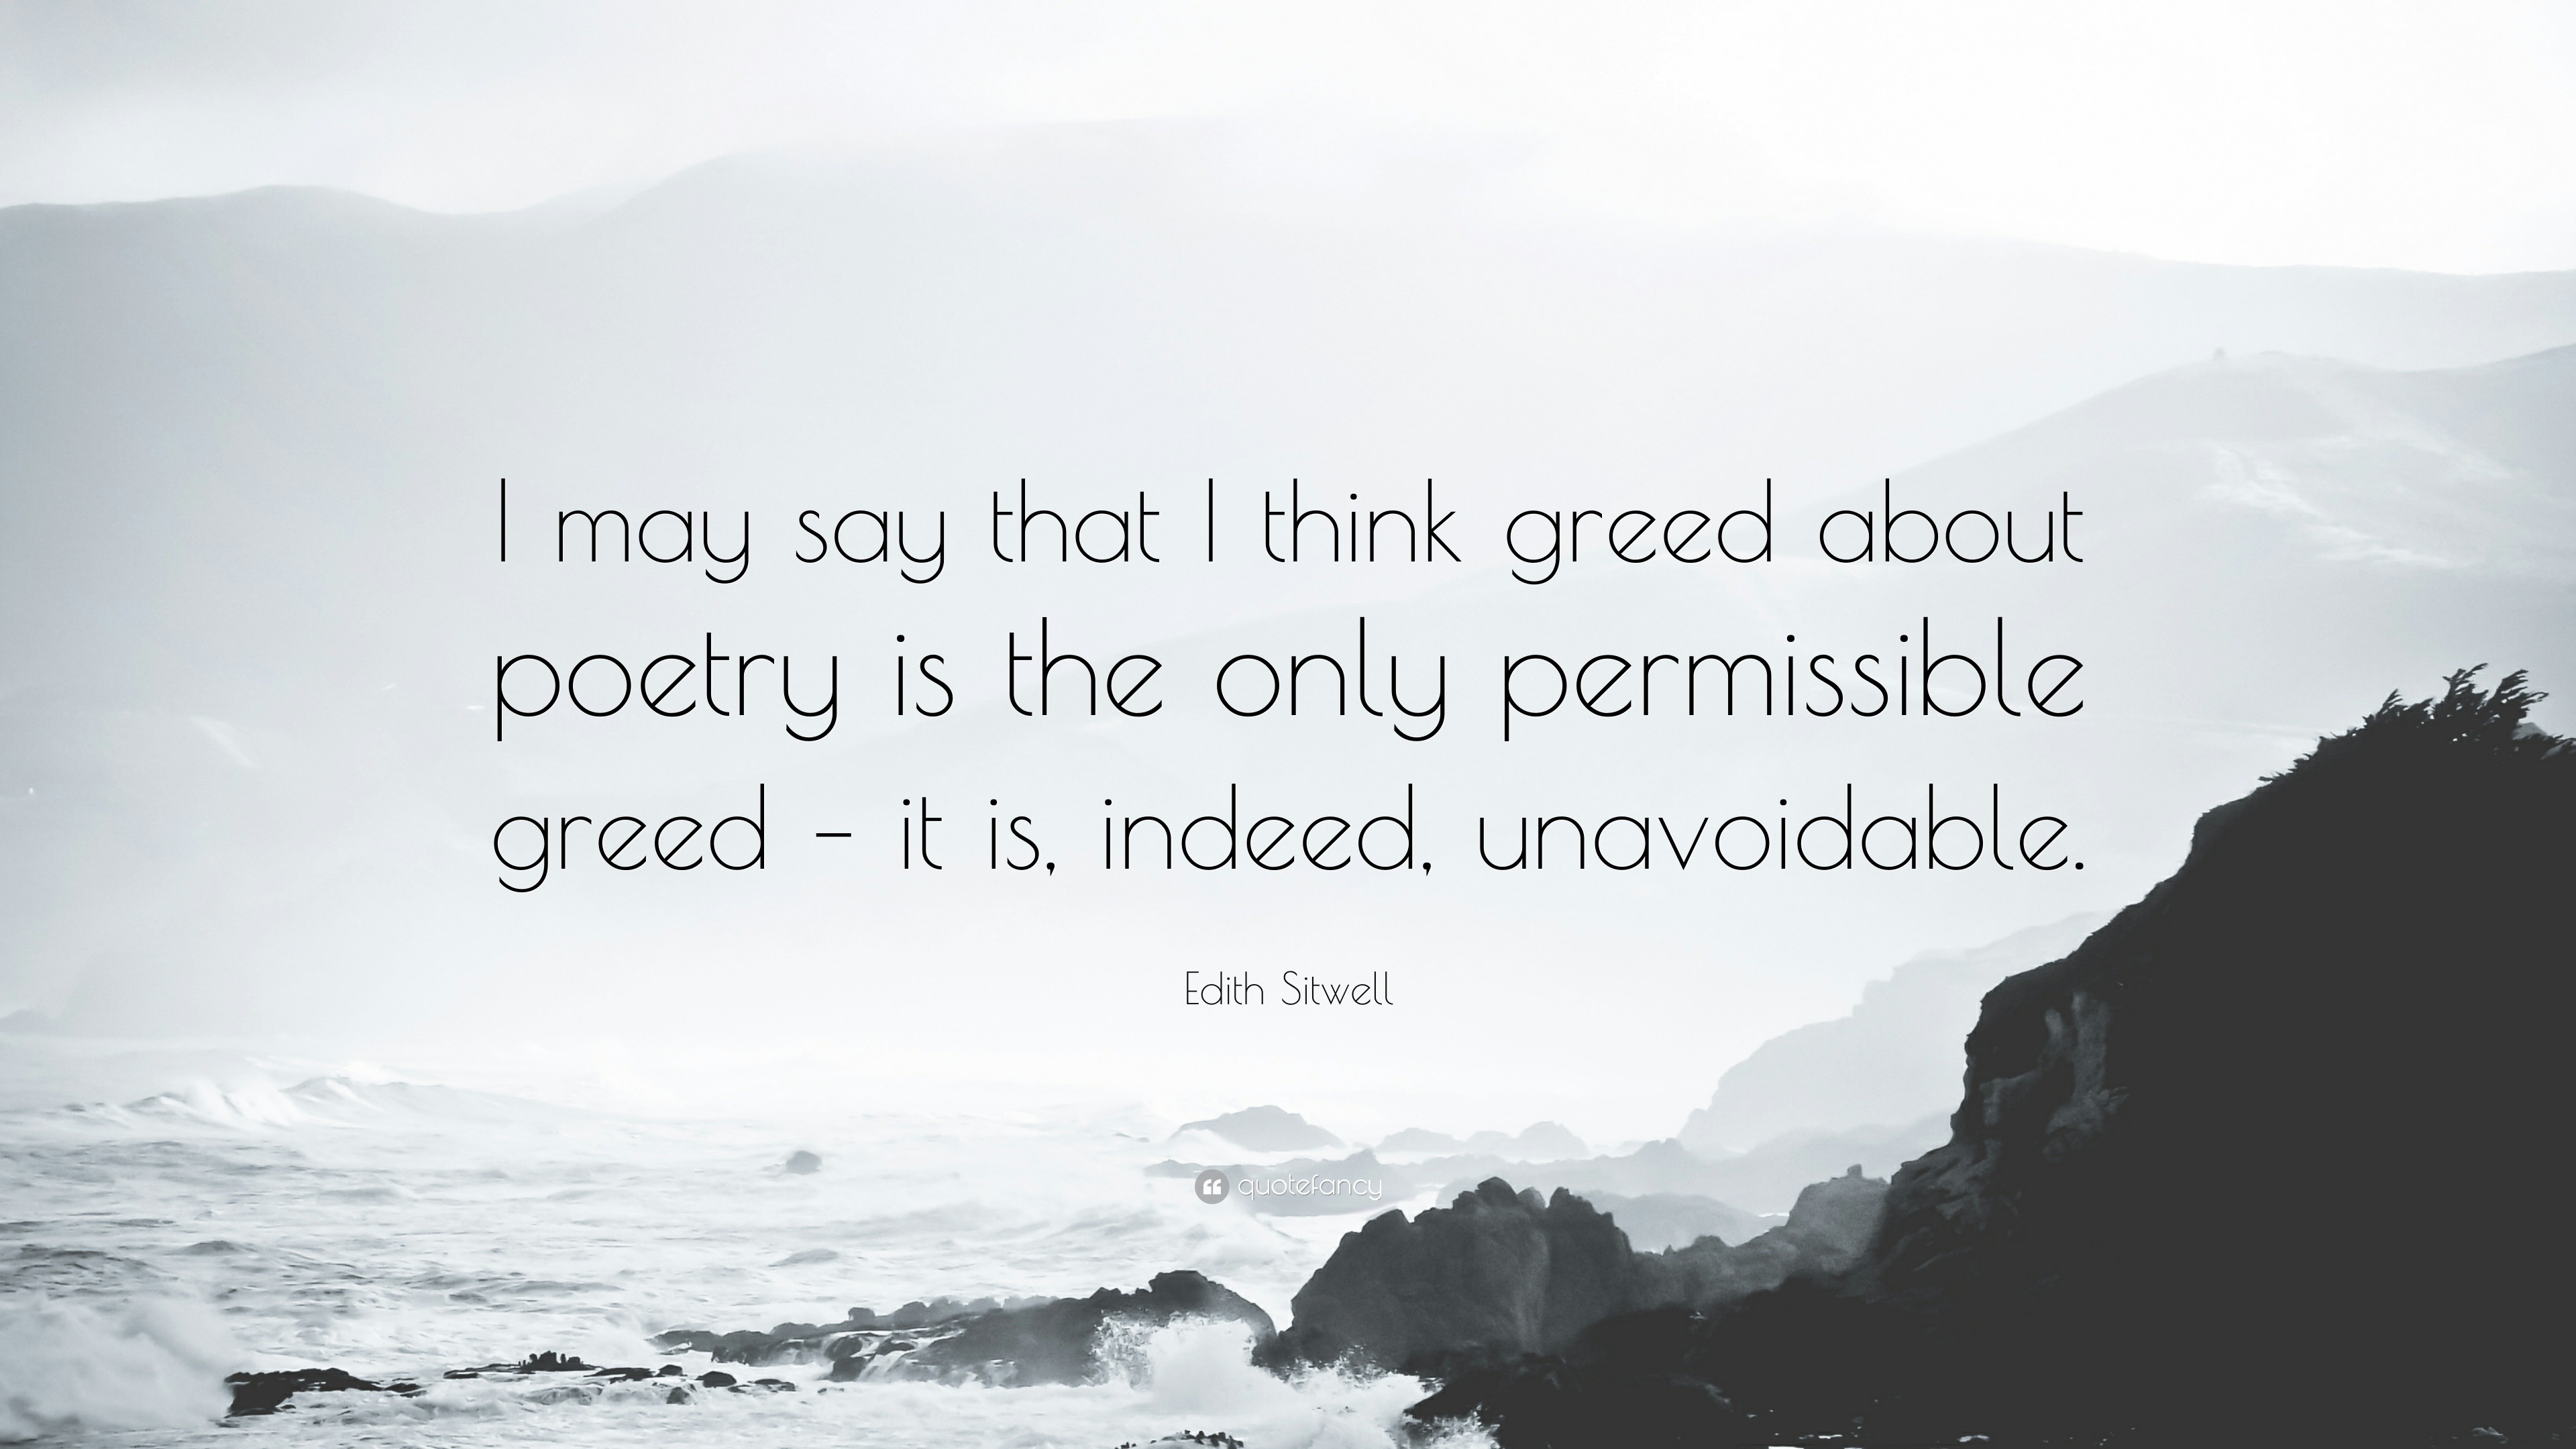 Edith Sitwell Quote: “I may say that I think greed about poetry is the